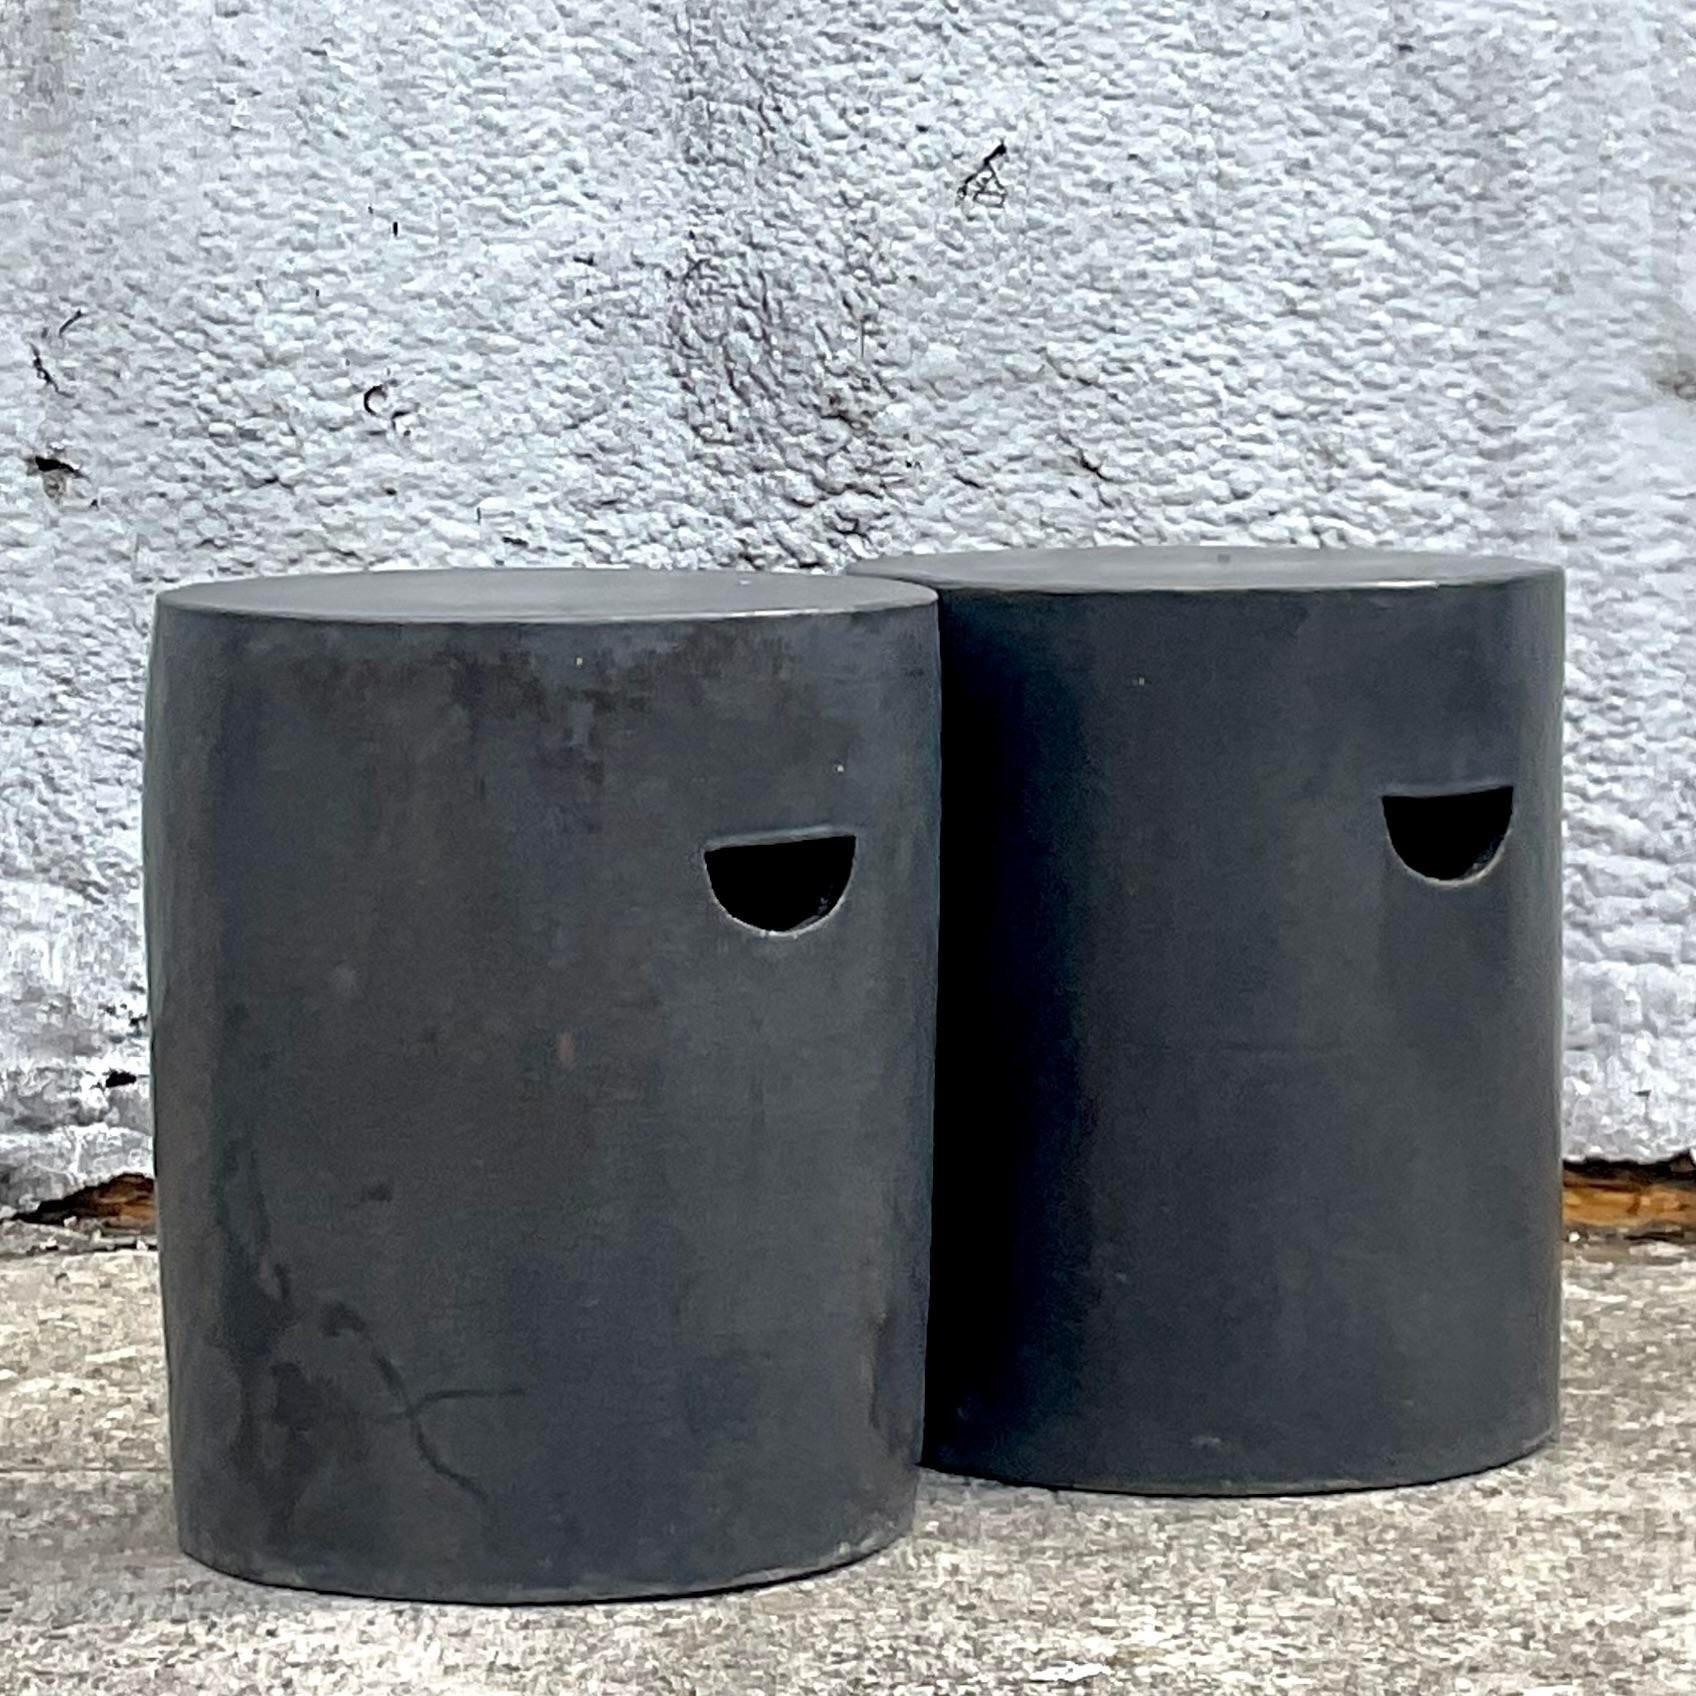 A fabulous pair of vintage Boho low stools. A chic matte glazed ceramic in a clean and modern shape. A fabulous dark grey color is a perfect neutral for so many spaces. Acquired from a Palm Beach estate.